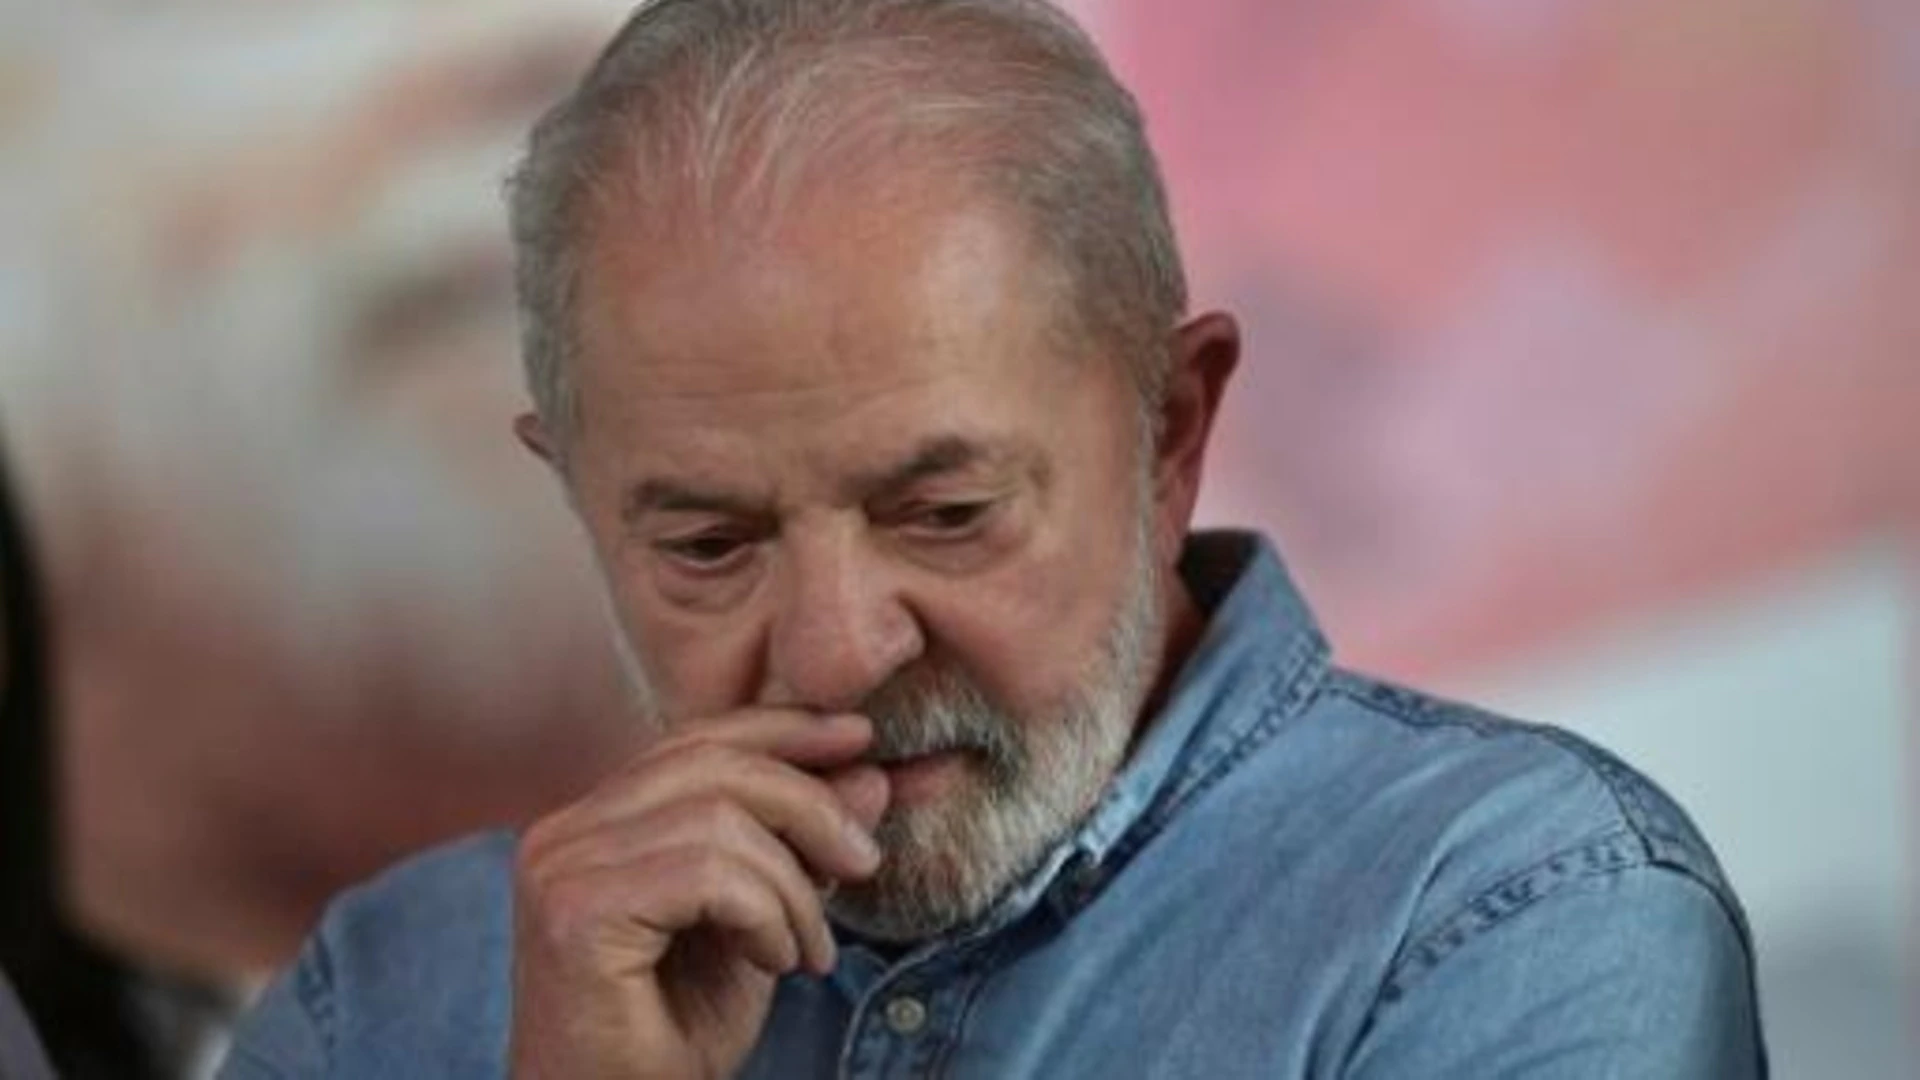 Lula says it is not the time to "judge" the choice of Qatar to host the World Cup